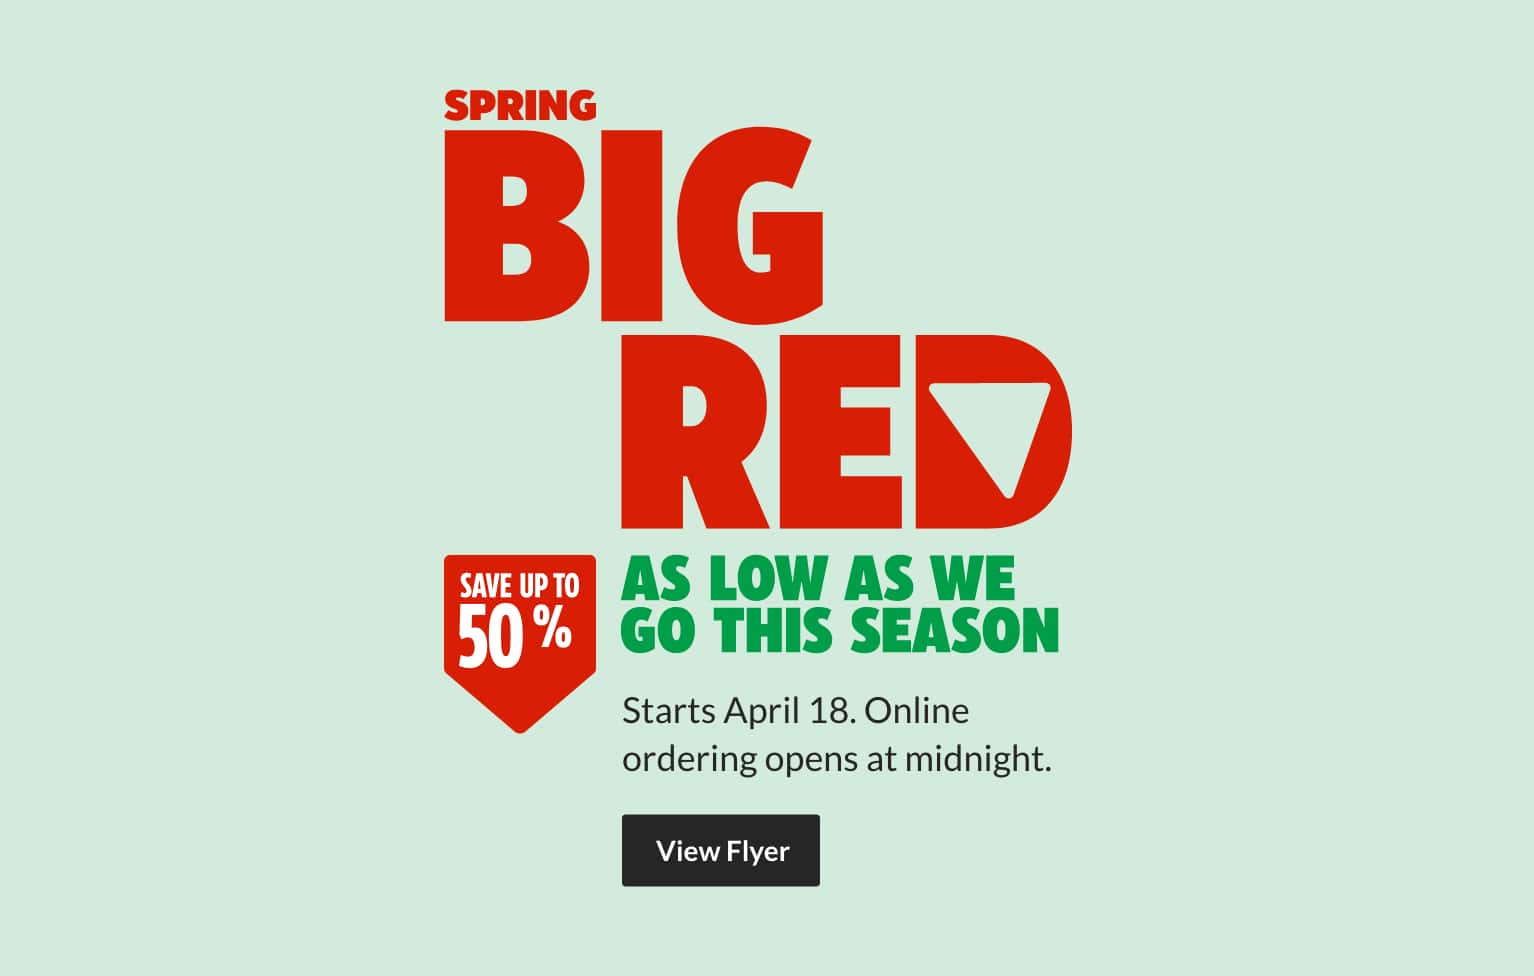 Preview our Spring Big Red Event flyer  